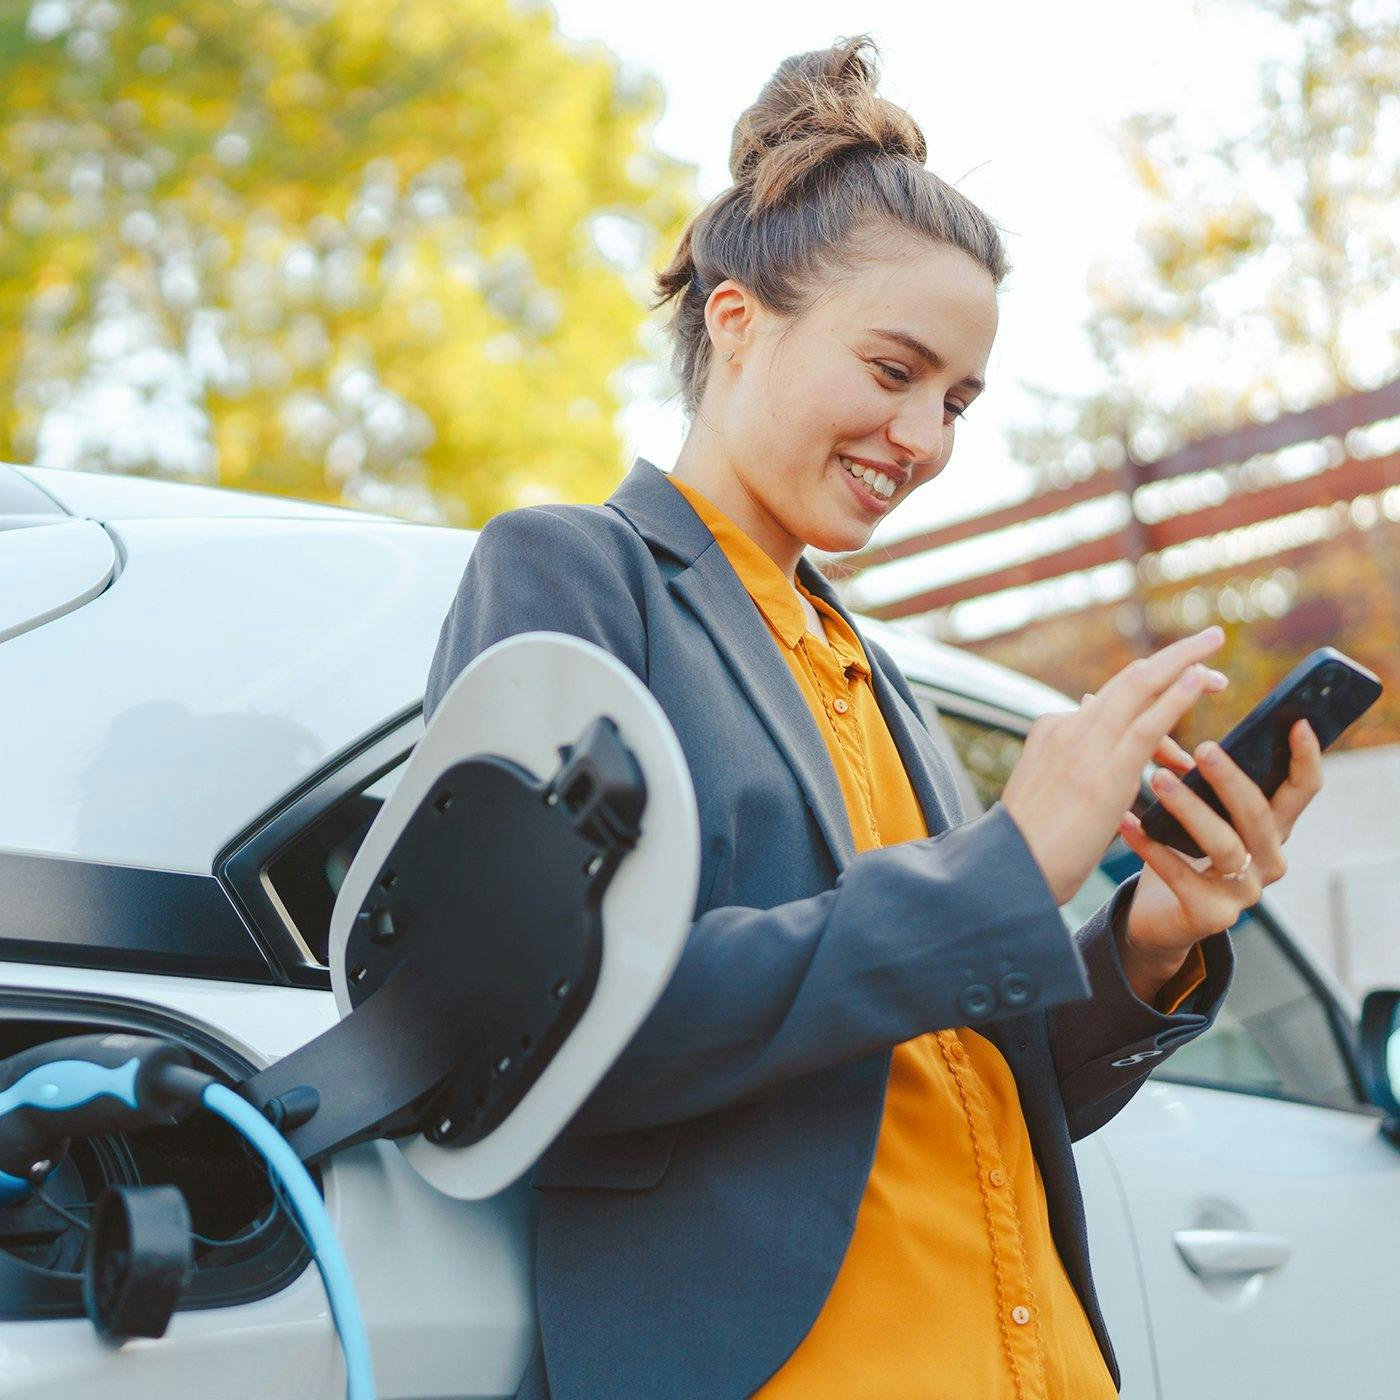 A woman uses her phone while leaning against her electric vehicle